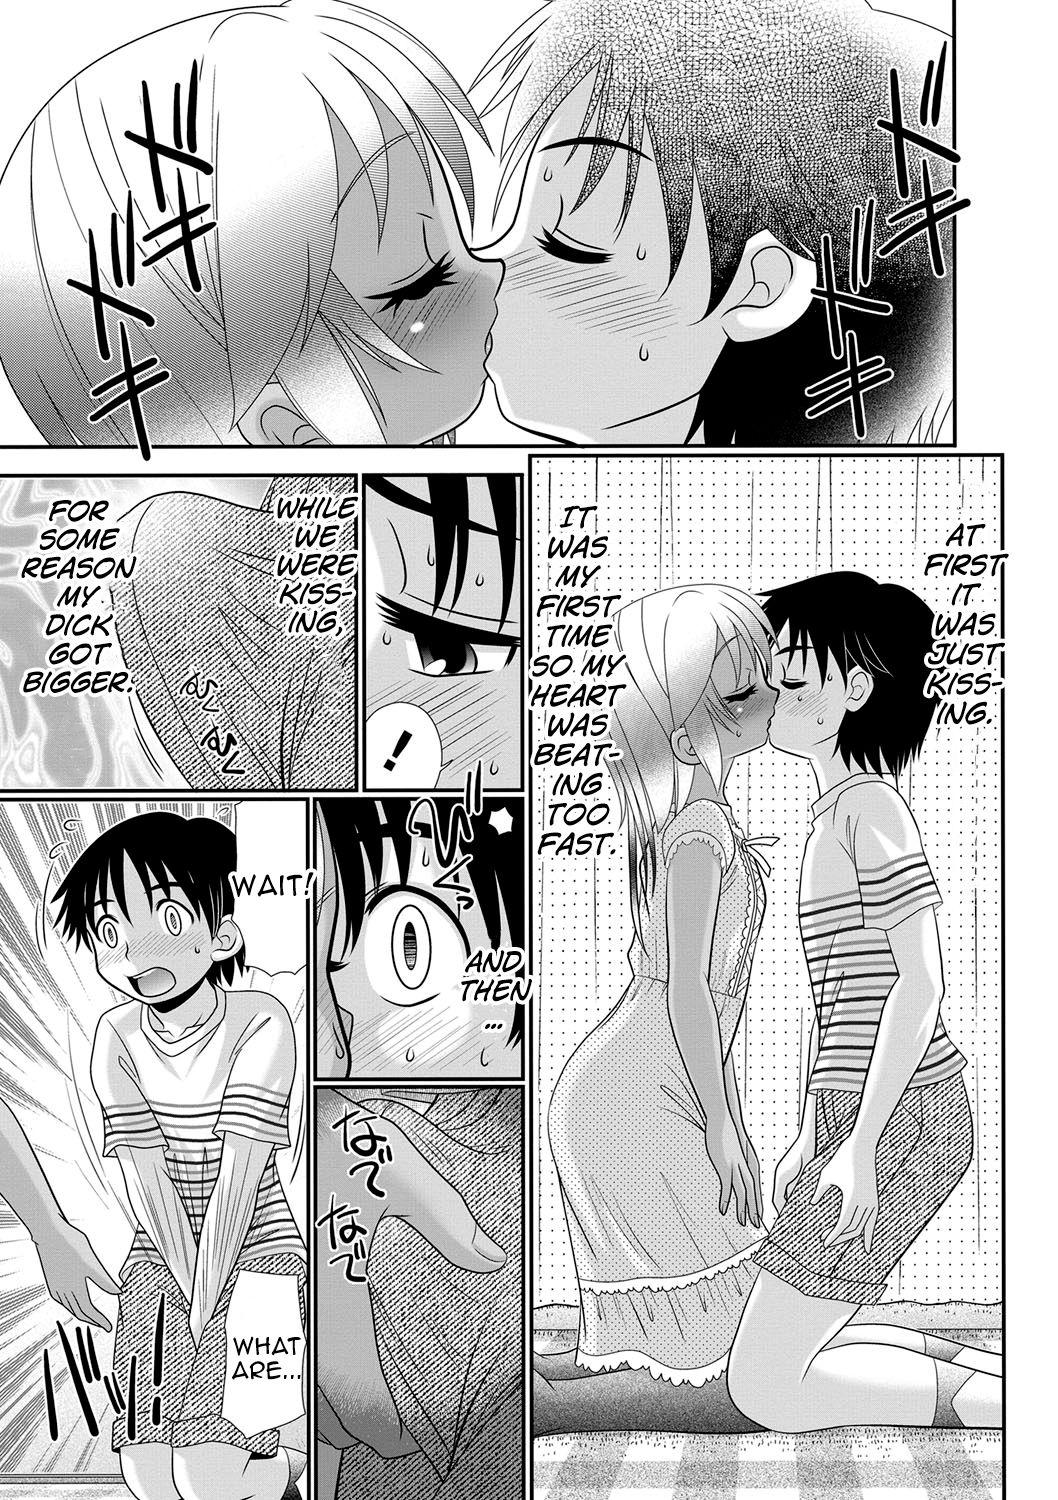 [R-Koga] Hiyake Sex Enikki - Picture Diary of a xxx with the Suntanned Ch.1-2 [Digital] [English] [MrBubbles] 16